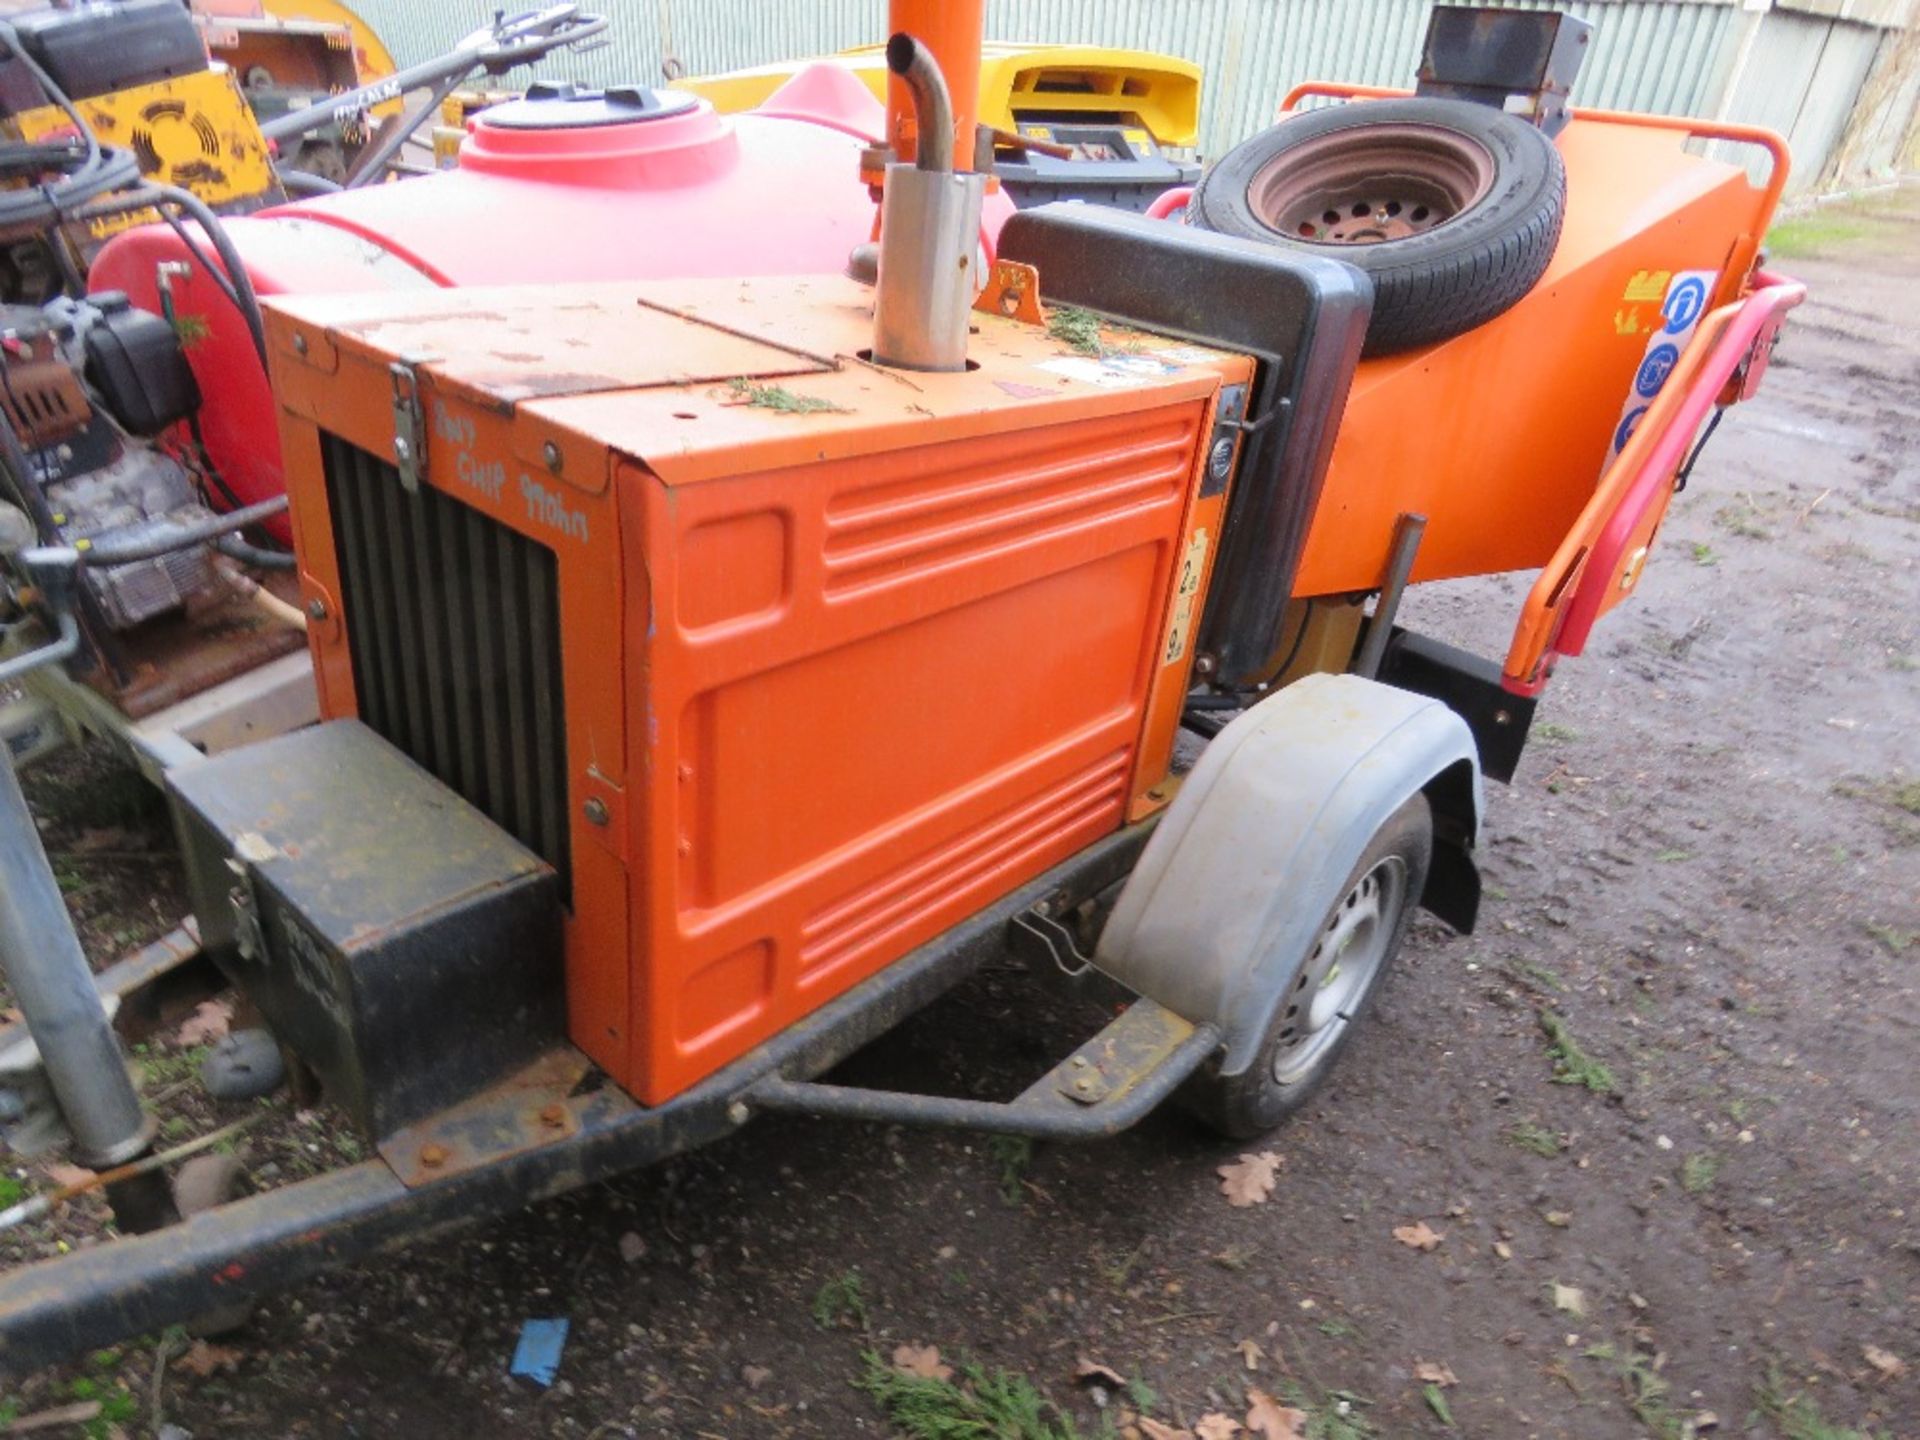 TIMBERWOLF TW150DHB TOWED CHIPPER UNIT WITH KUBOTA DIESEL ENGINE. 990 RECORDED HOURS APPROX. WITH KE - Image 2 of 12